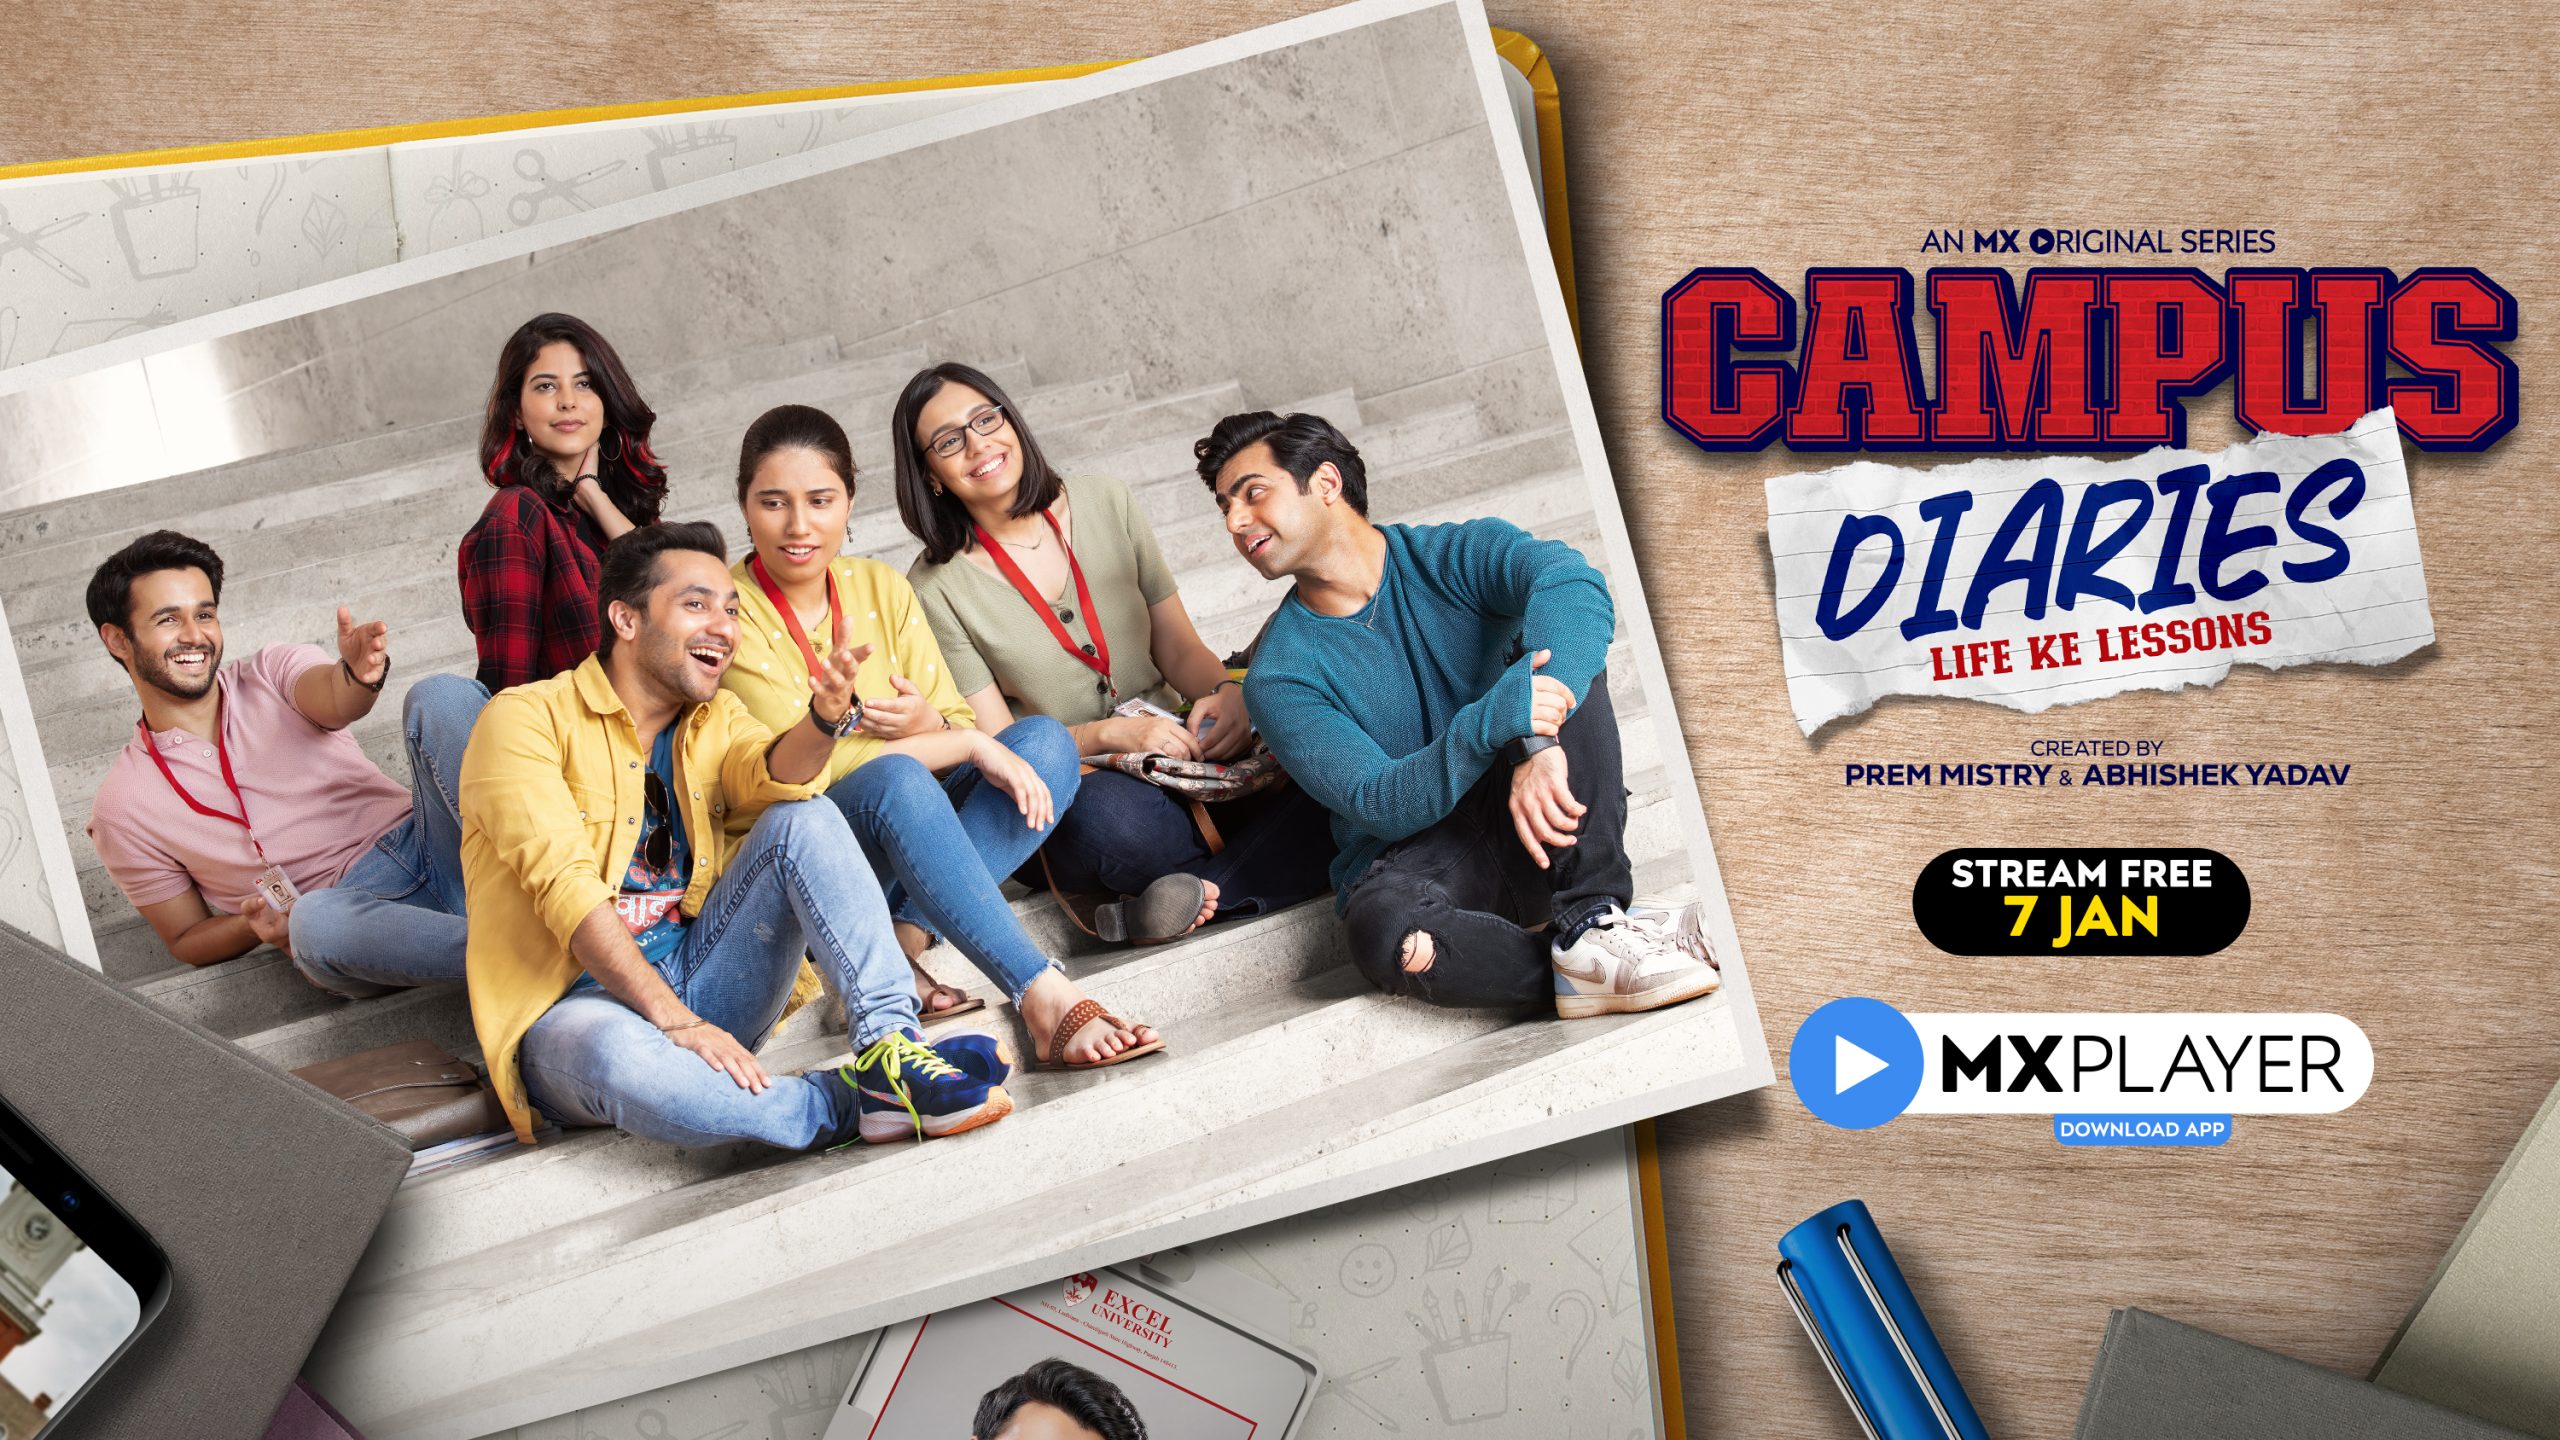 Actor #RitvikSahore and #HarshBeniwal reminisce about their college days while shooting #CampusDiaries!